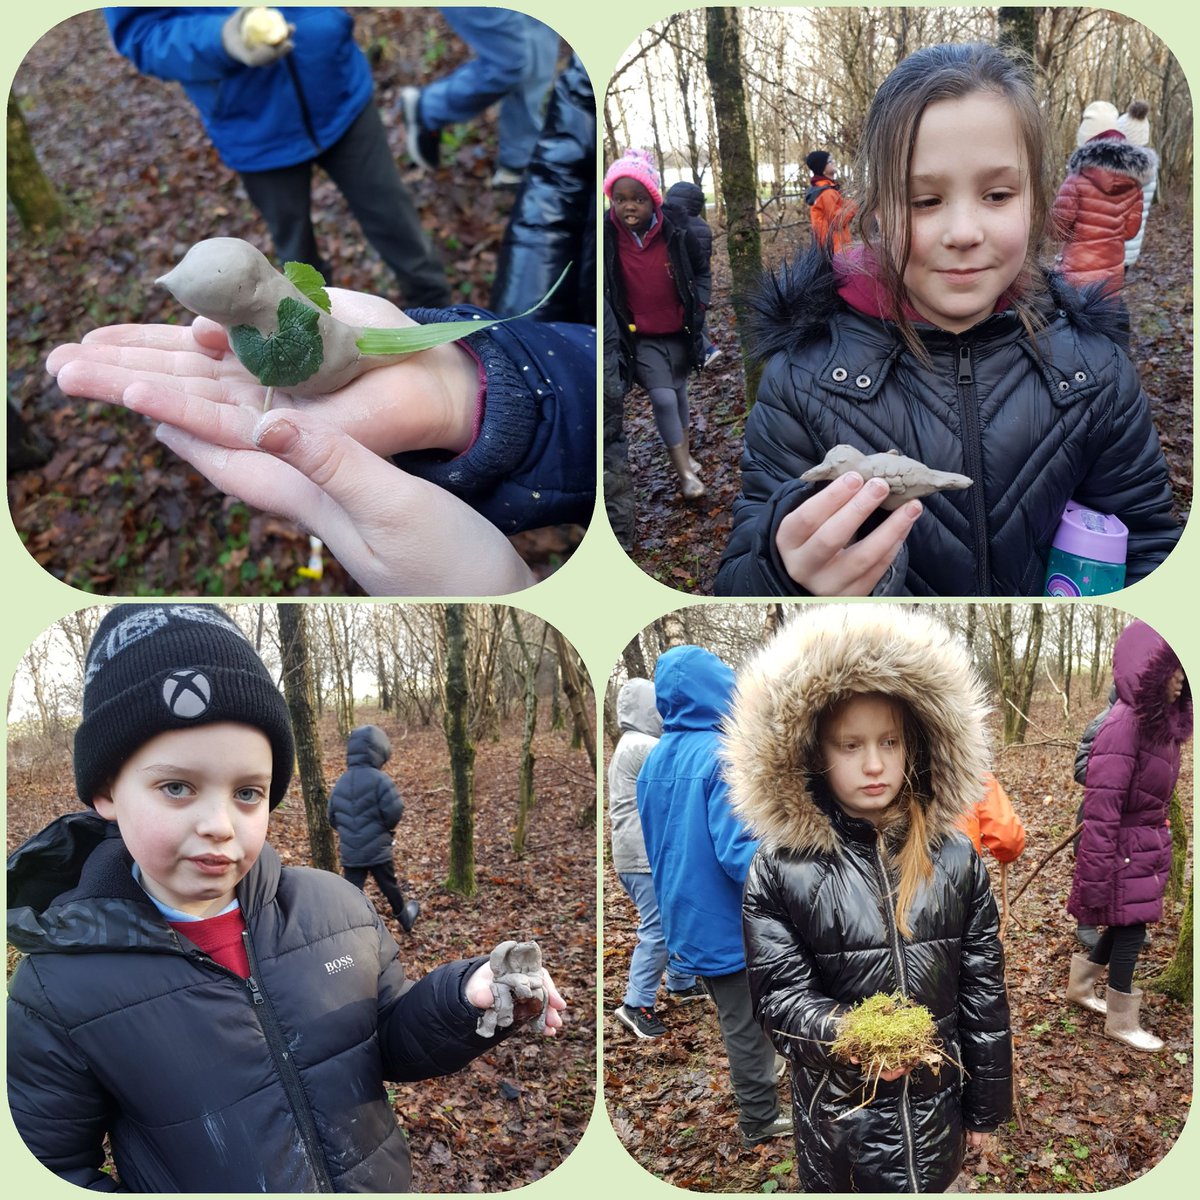 Today we went to #HogganfieldLoch with @TCVScotland @TCVtweets and made some fantastic clay birds in the woods #outdoorlearning. The children used their knowledge of different birds in Scotland #bigschoolsbirdwatch @TCVCitSci